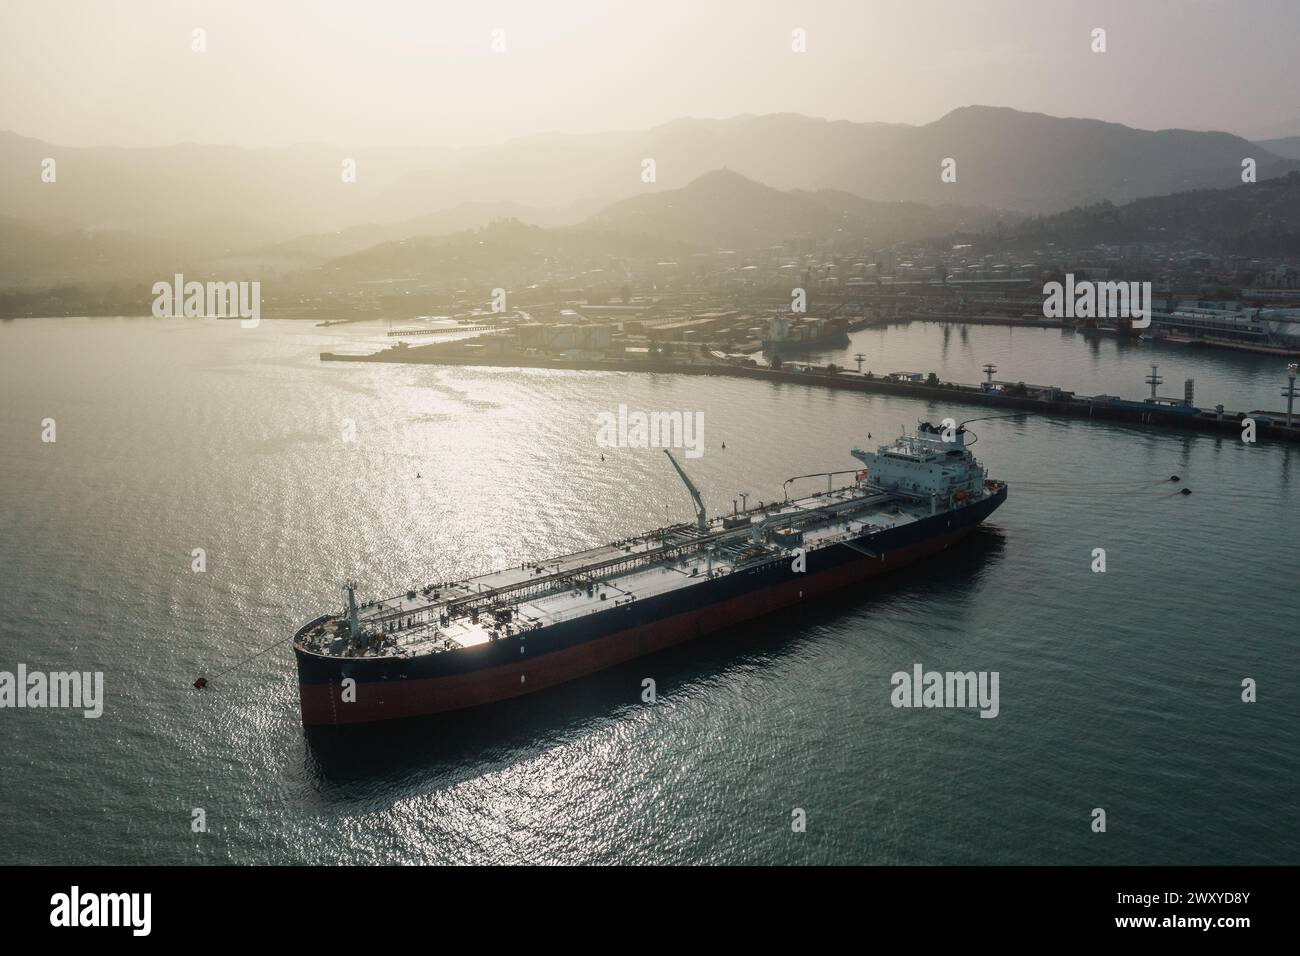 Tanker moored at oil terminal, intricate part of global petro resource trade, aerial view from drone. Key hub in industry logistics and distribution. Essential in the chain of energy supply and commerce. Stock Photo